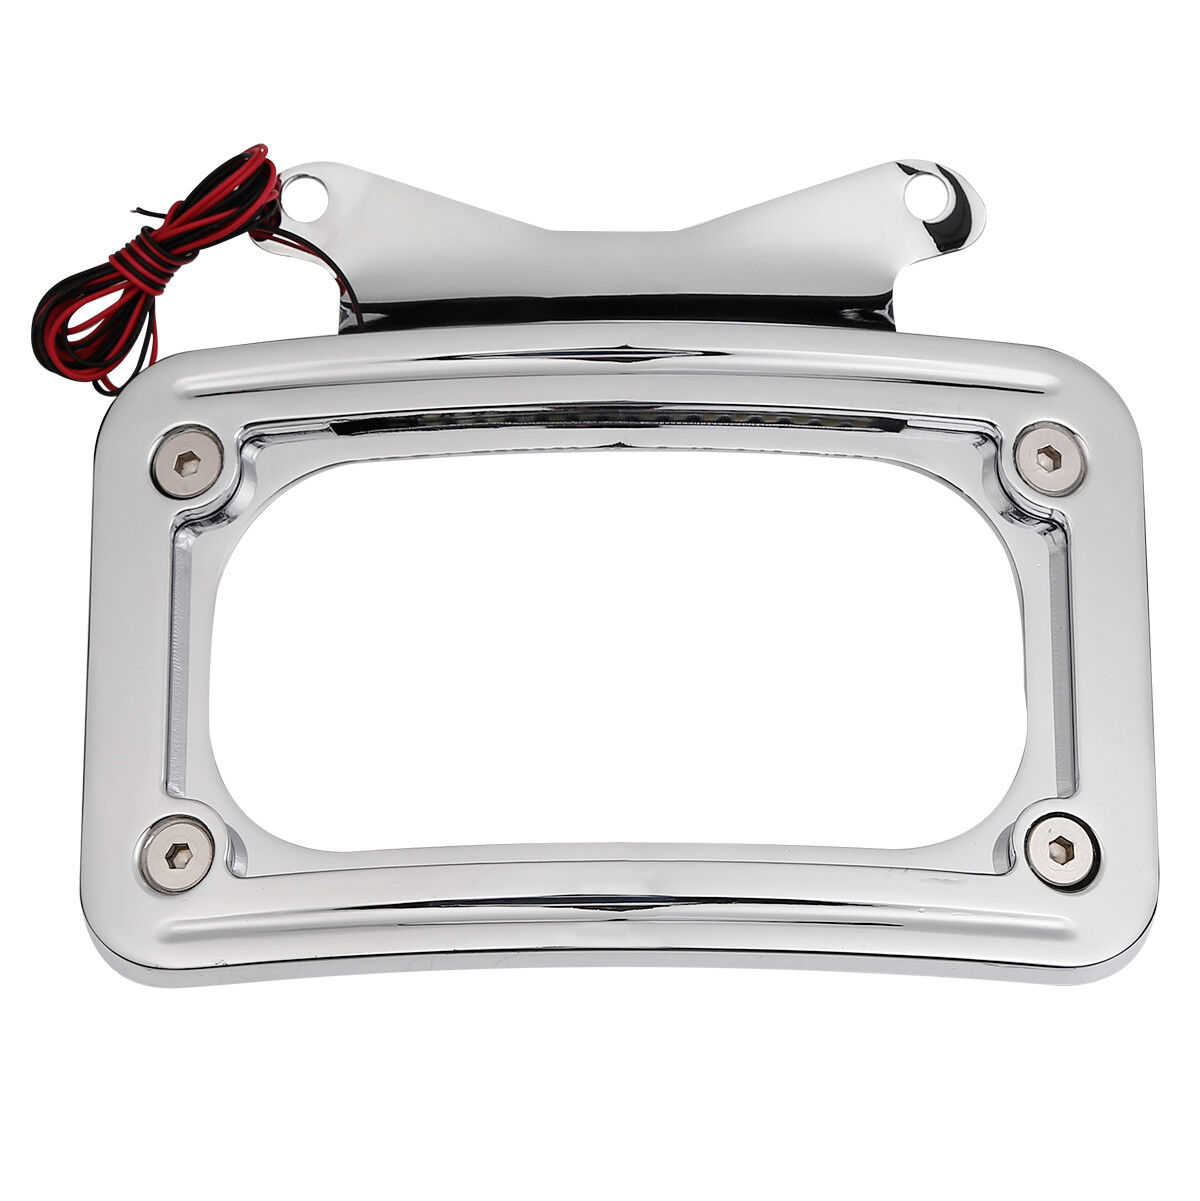 Chrome Curved Laydown License Plate Mount Frame w/ Light For Harley Street Glide